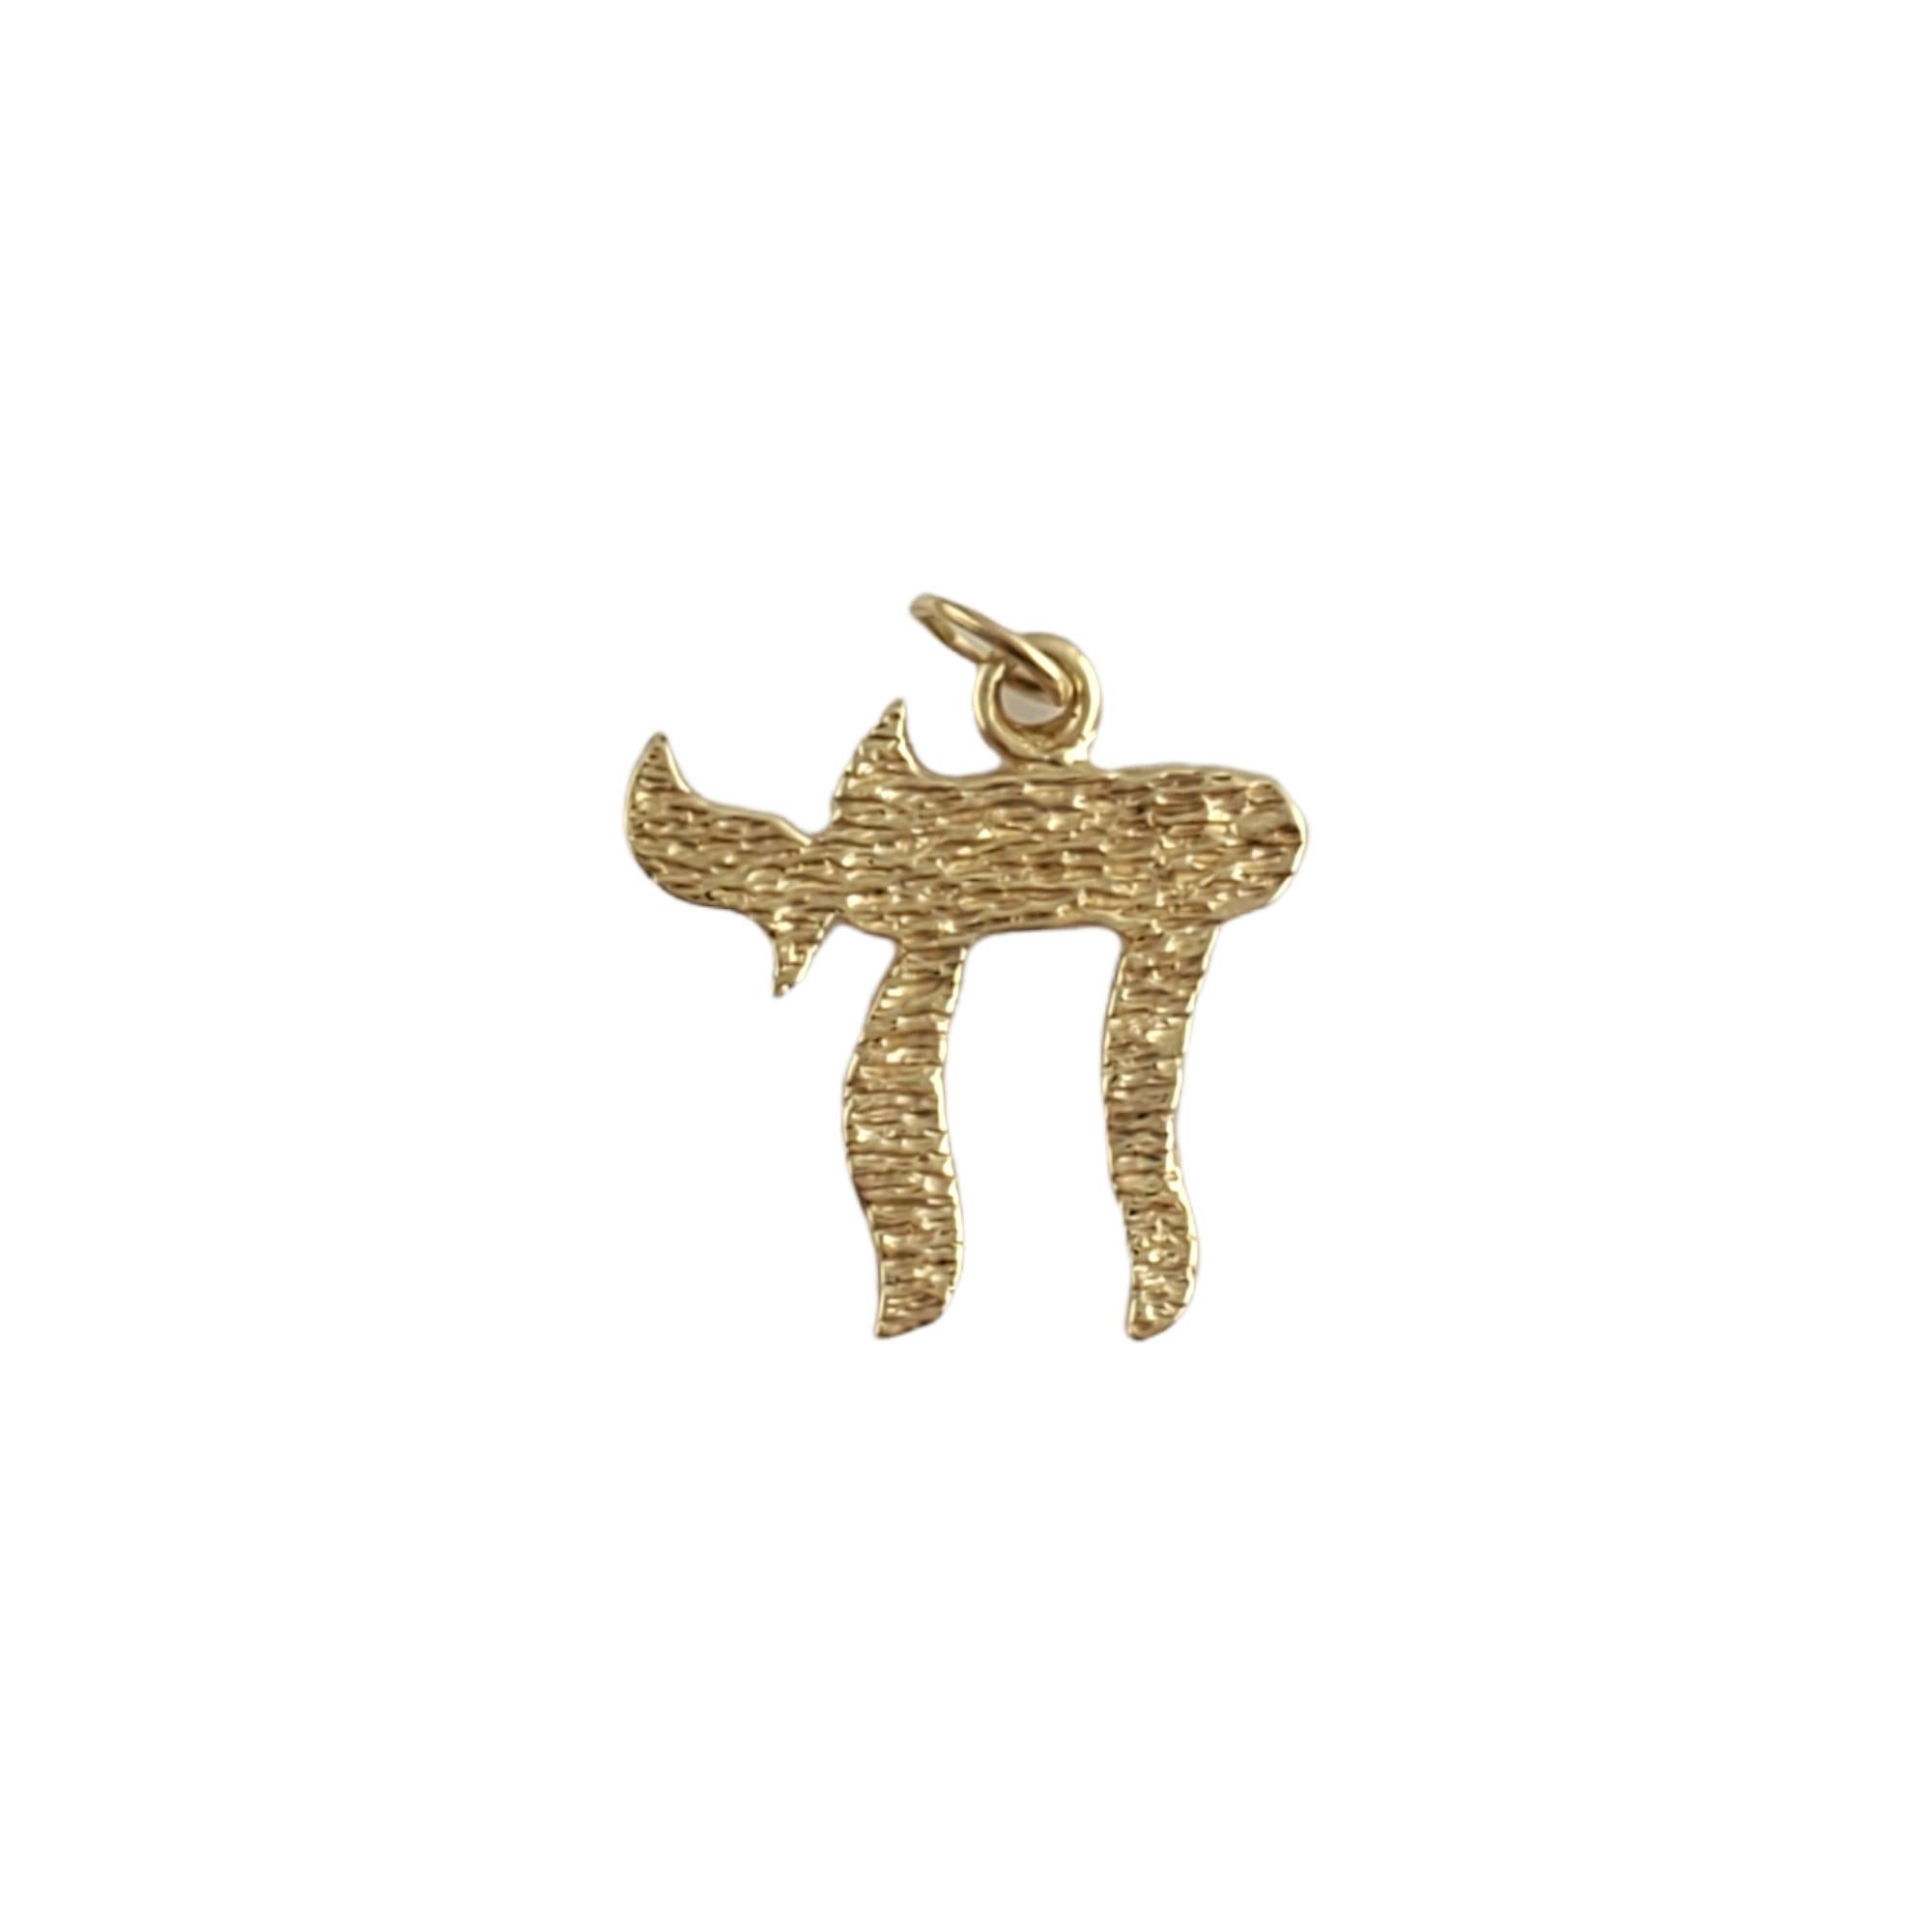 You'll love this beautiful yellow gold chai charm!

Size: 3.85mm X 18.94mm

Weight:  1.7gr / 1.0 dwt

Hallmark: 14K

Very good condition, professionally polished.

Will come packaged in a gift box and will be shipped U.S. Priority Mail